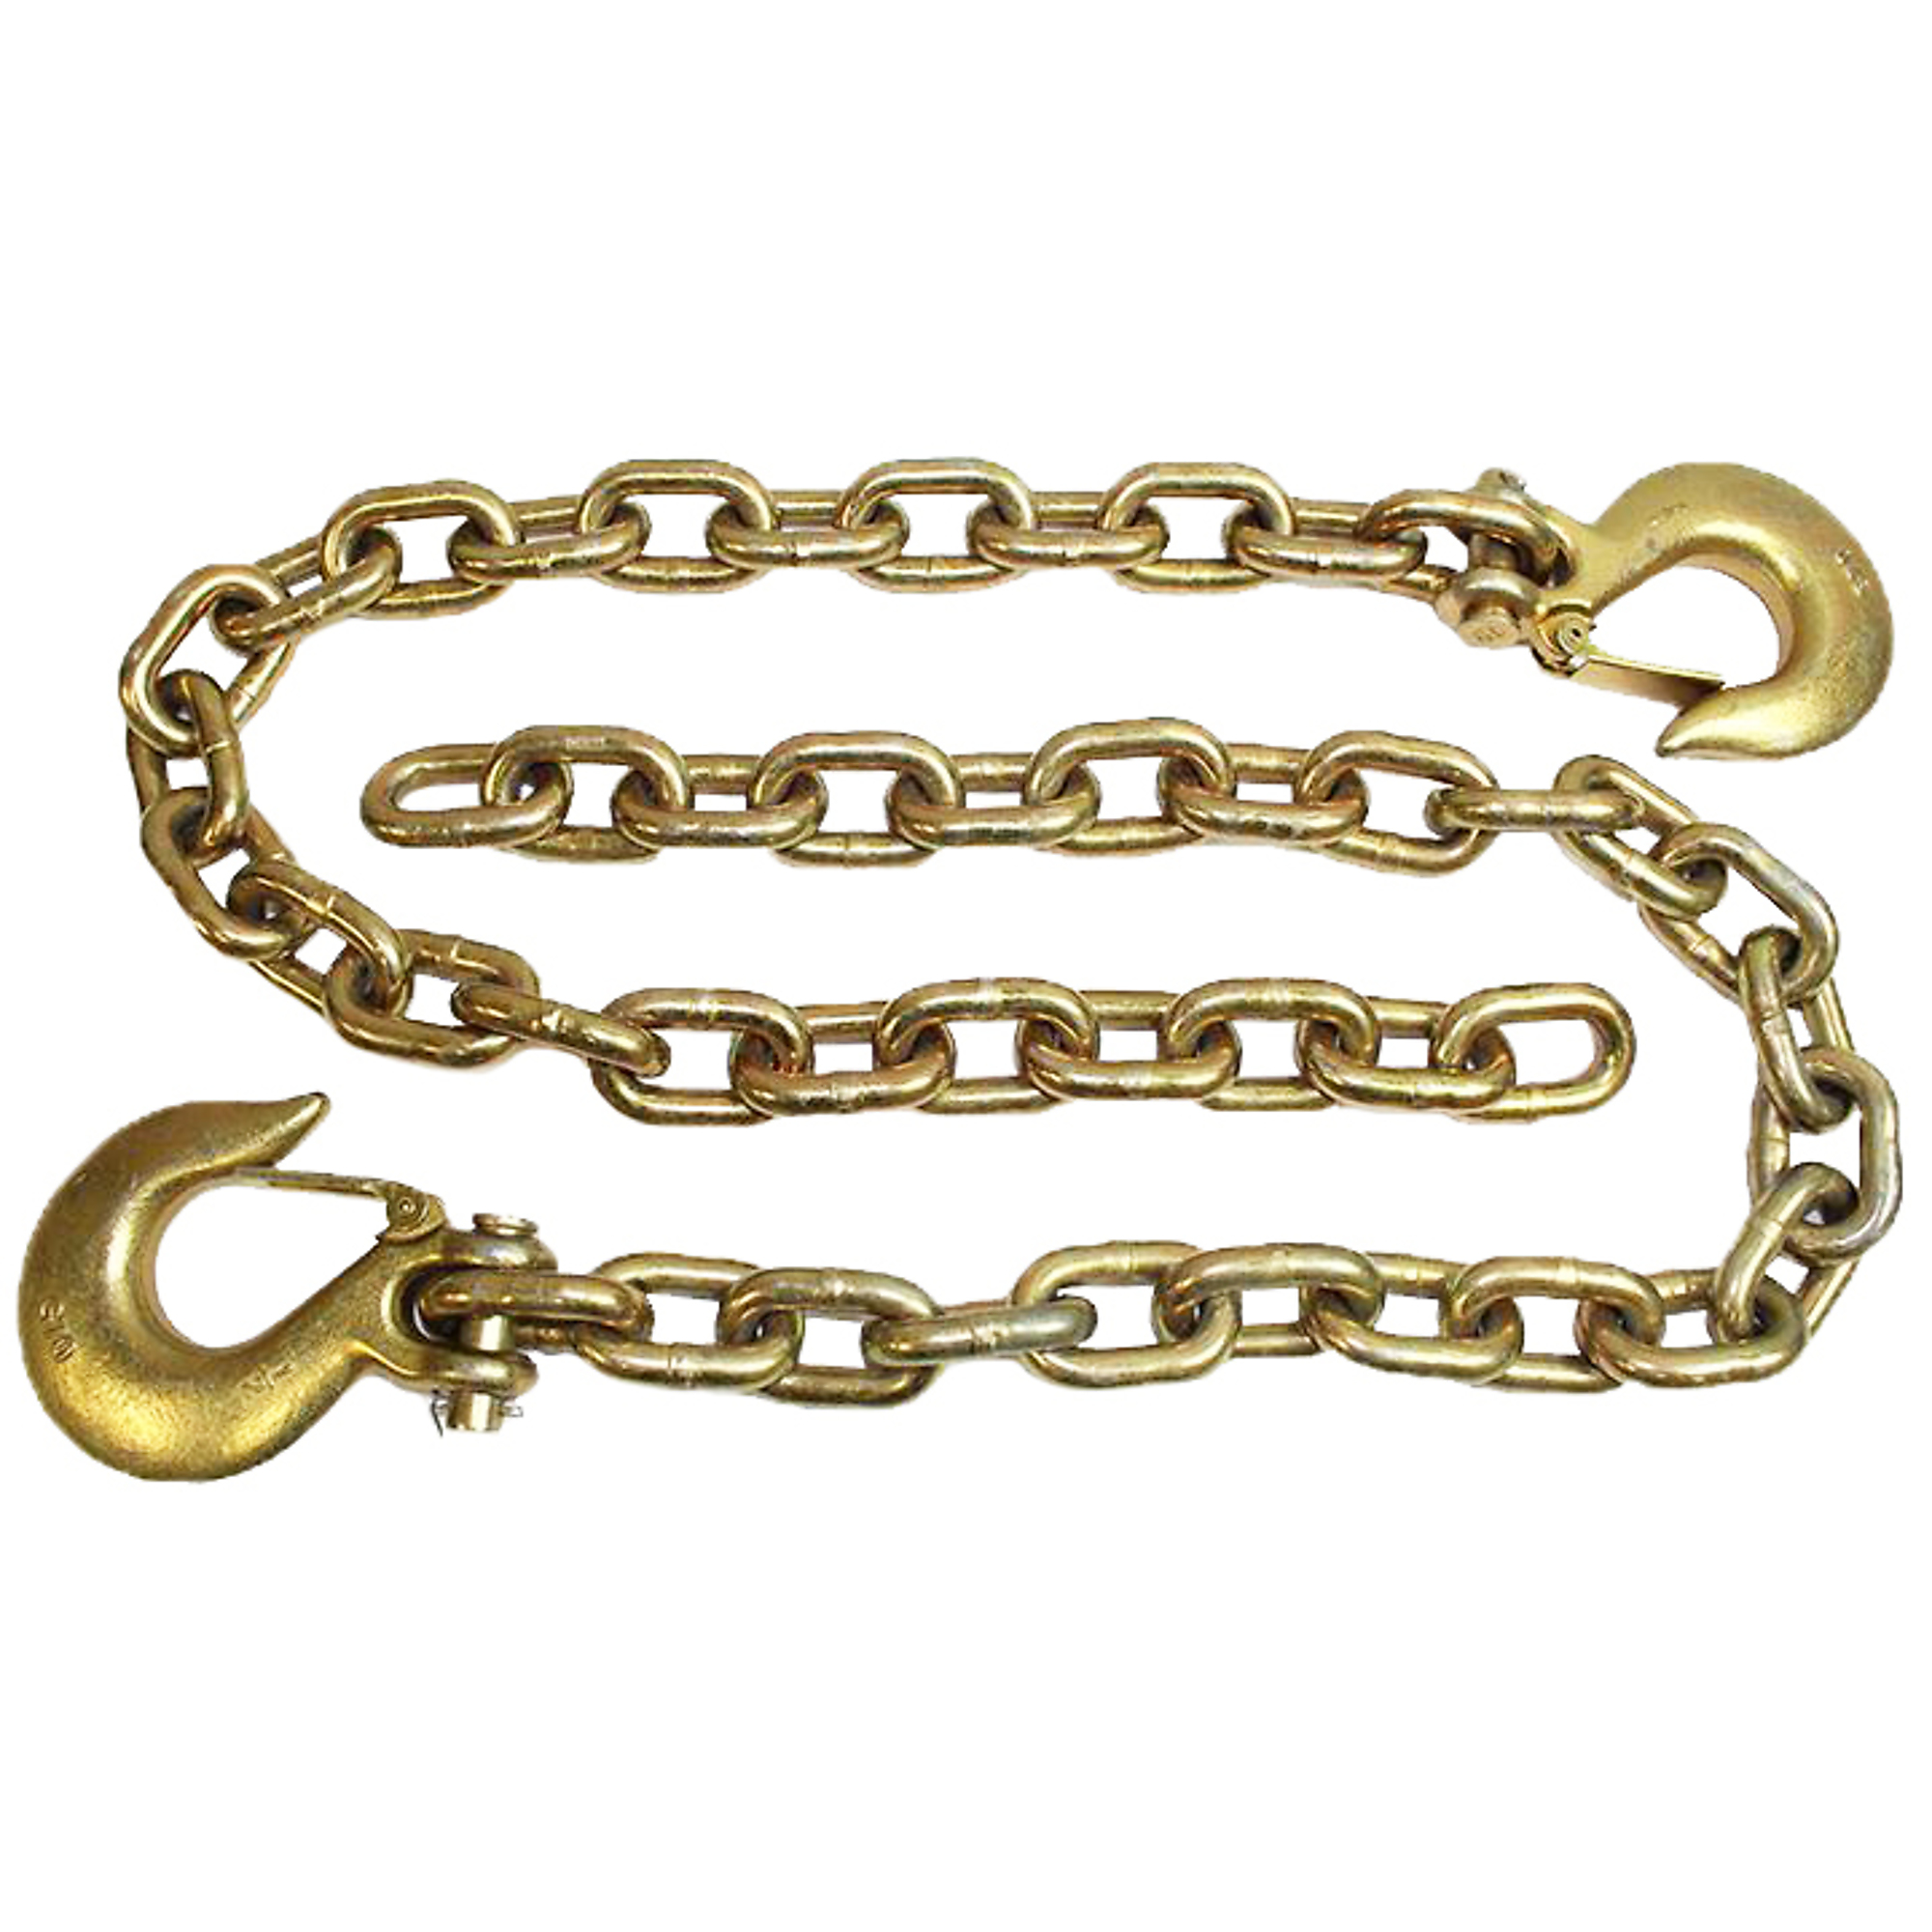 BulletProof Hitches, EXTREME DUTY 1/2Inch SAFETY CHAINS (PAIR), Fits Receiver Size Multiple in, Model EDCHAINS